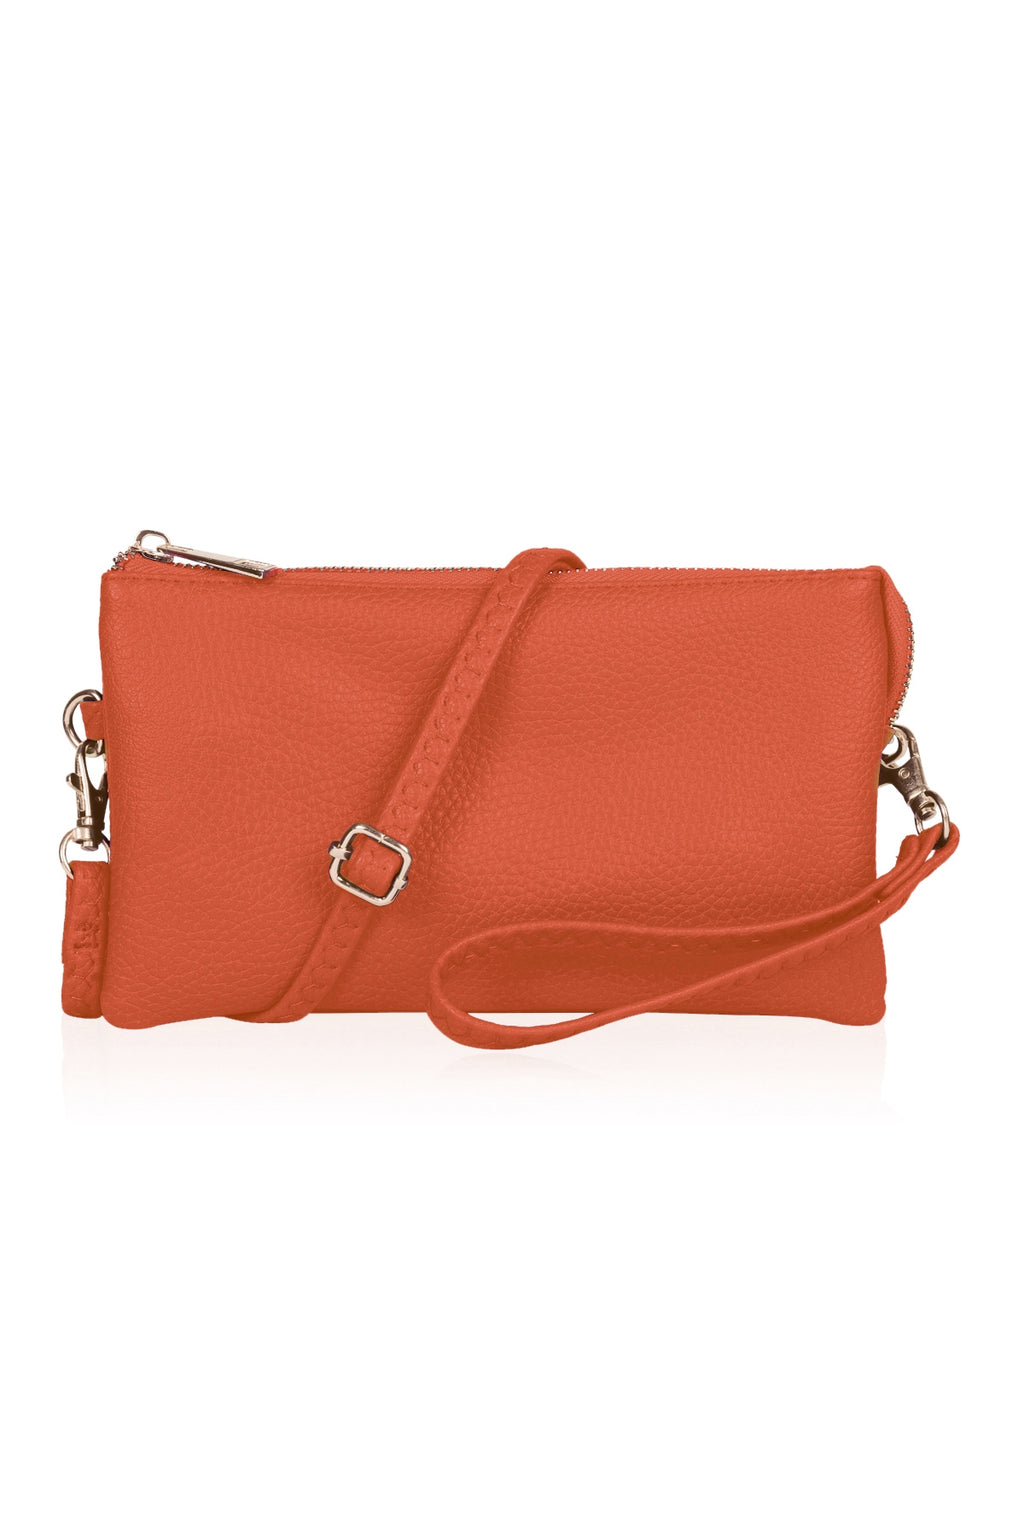 Leather Crossbody Bag with Wristlet Orange - Pack of 6